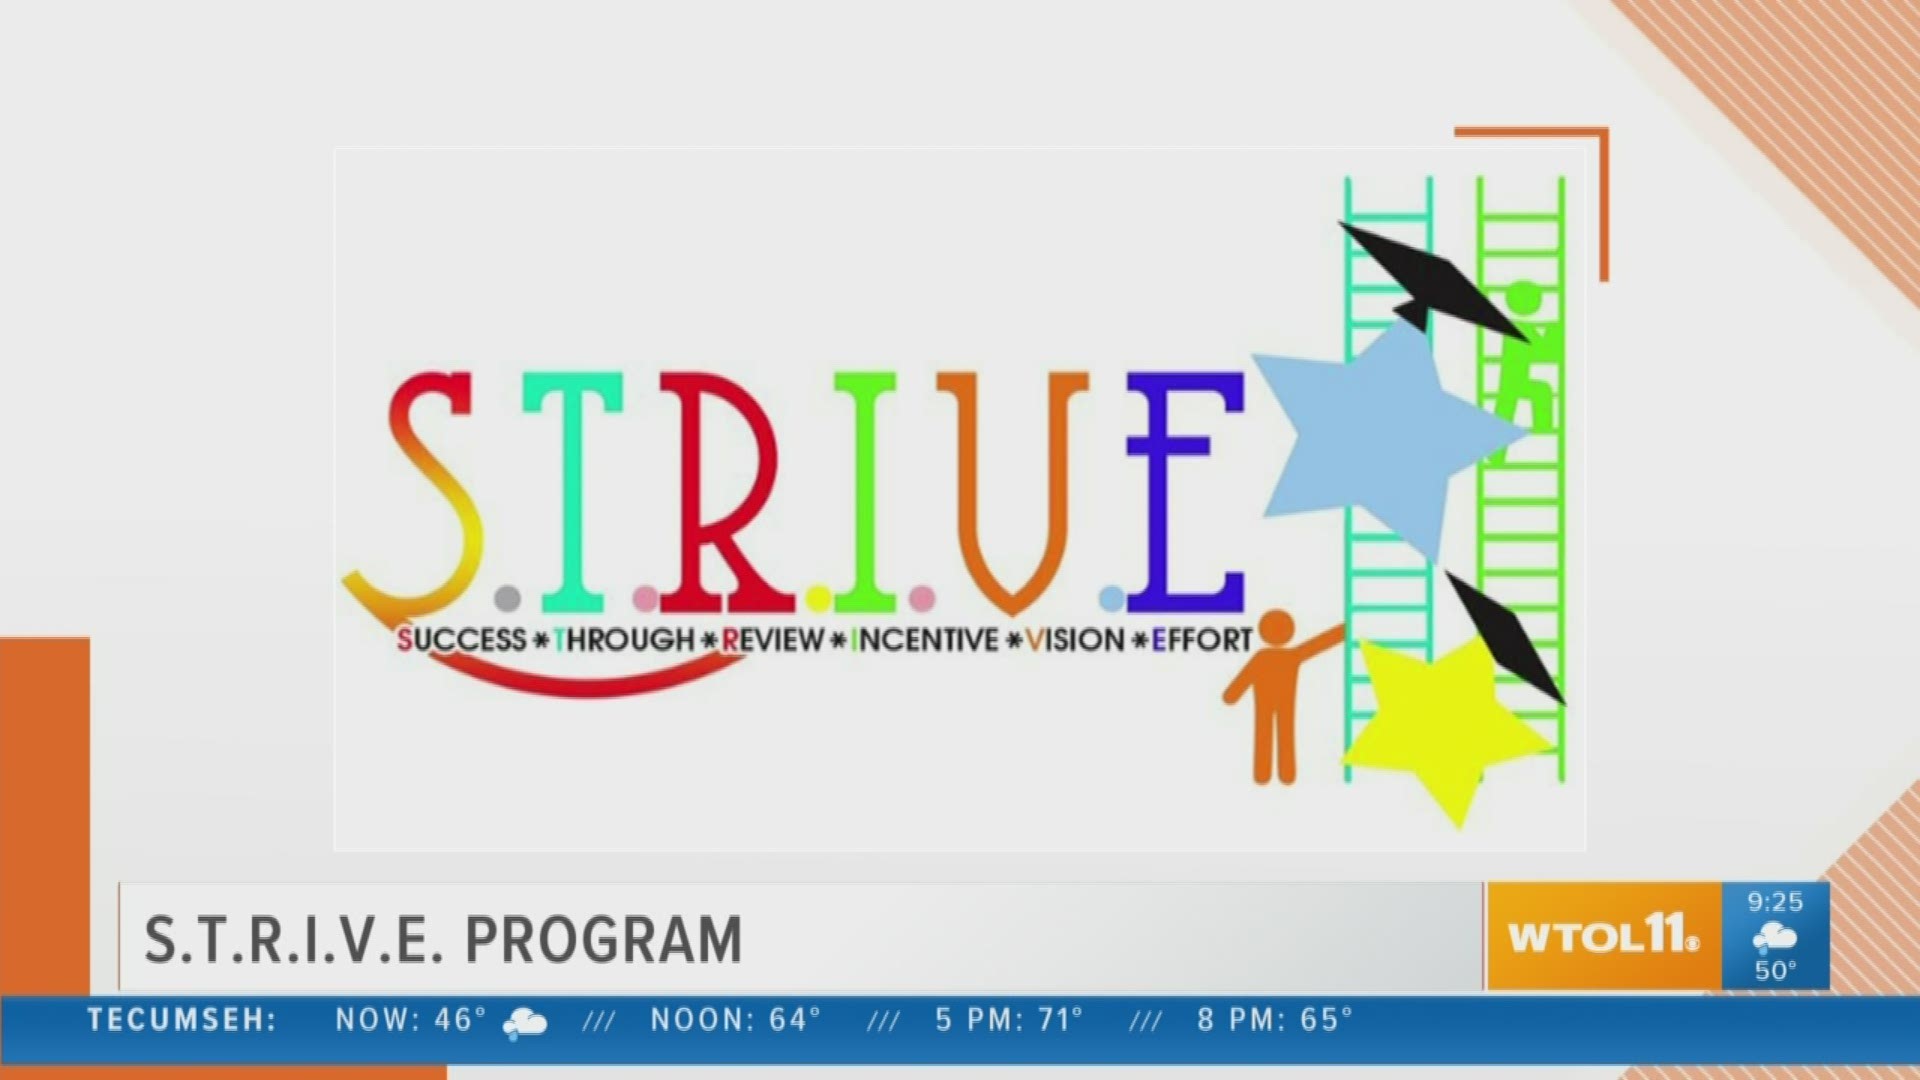 The S.T.R.I.V.E program keeps kids learning and out of trouble during the summer months